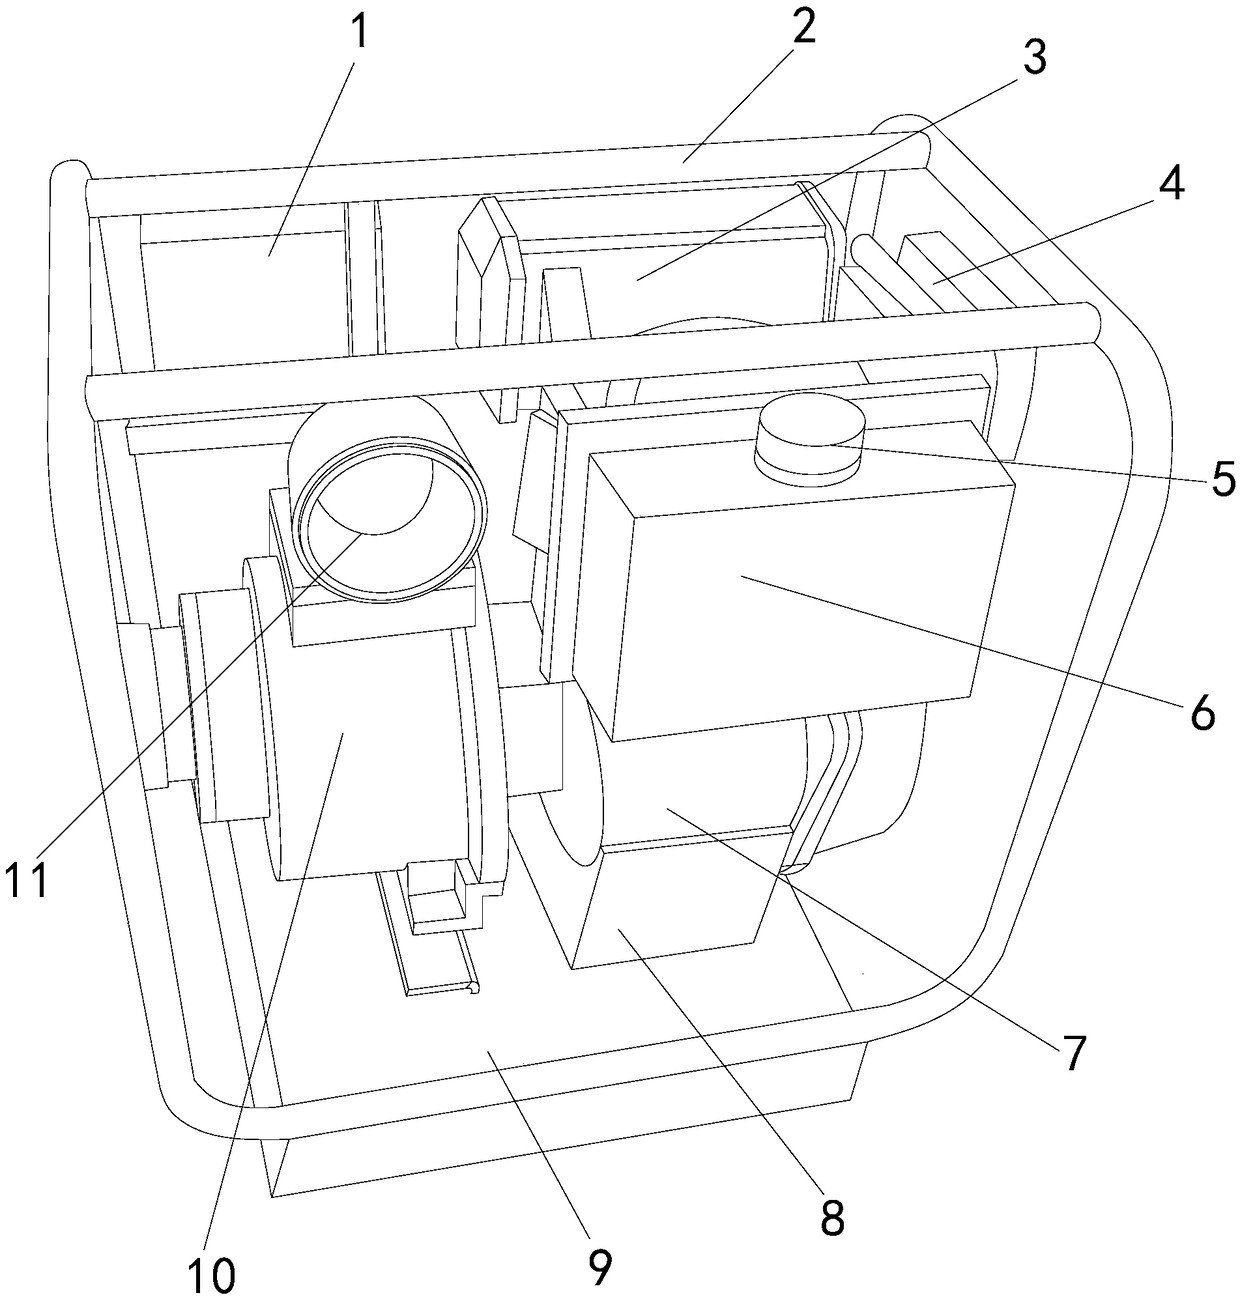 Diesel engine fire protection device with multi-damping effect and left and right shifting damping effect